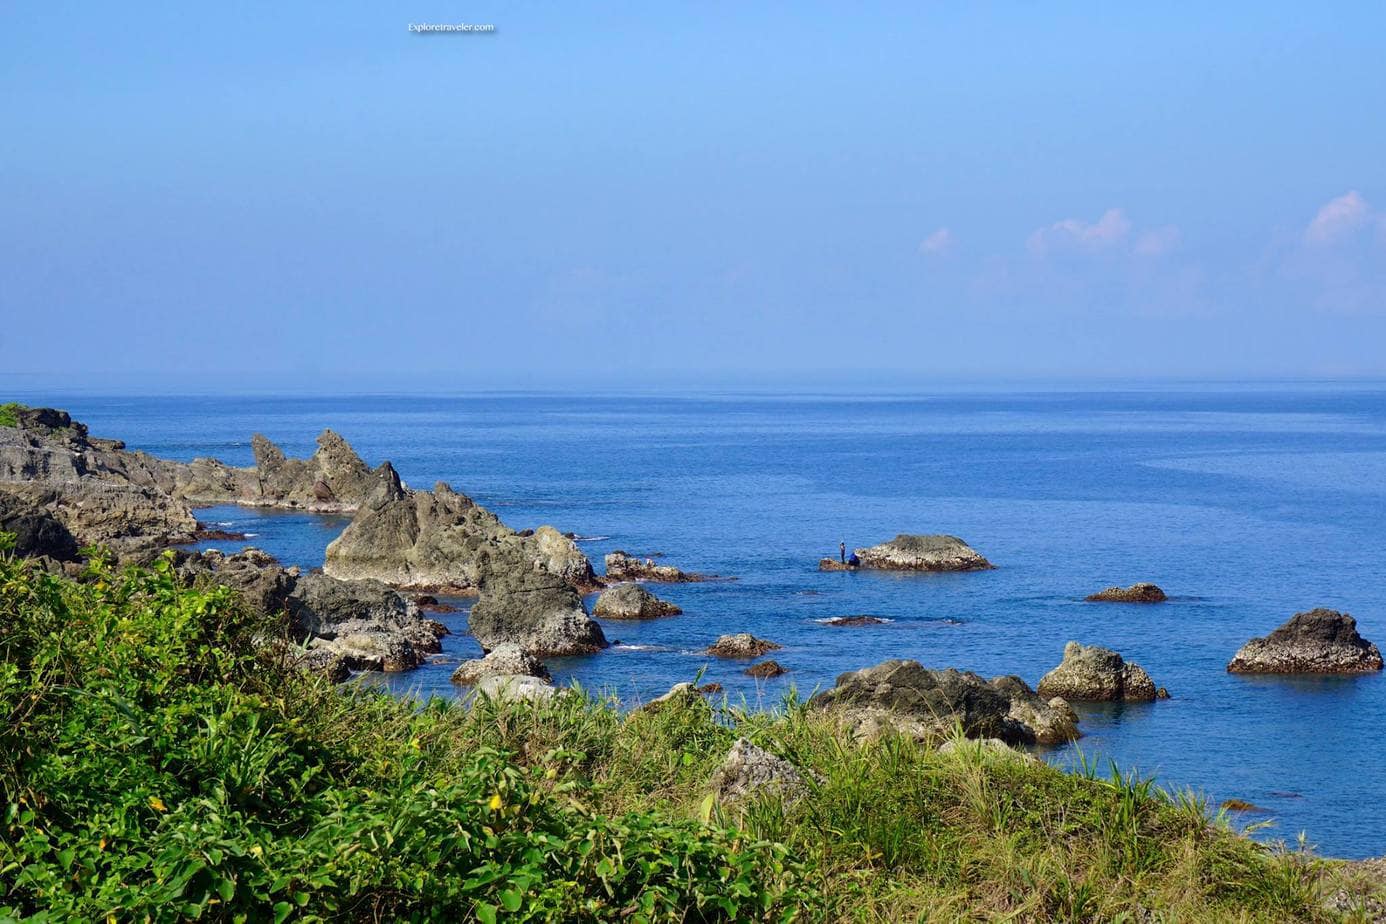 Rugged coral reefs and volcanic rock along the beaches of Taitung County Taiwan